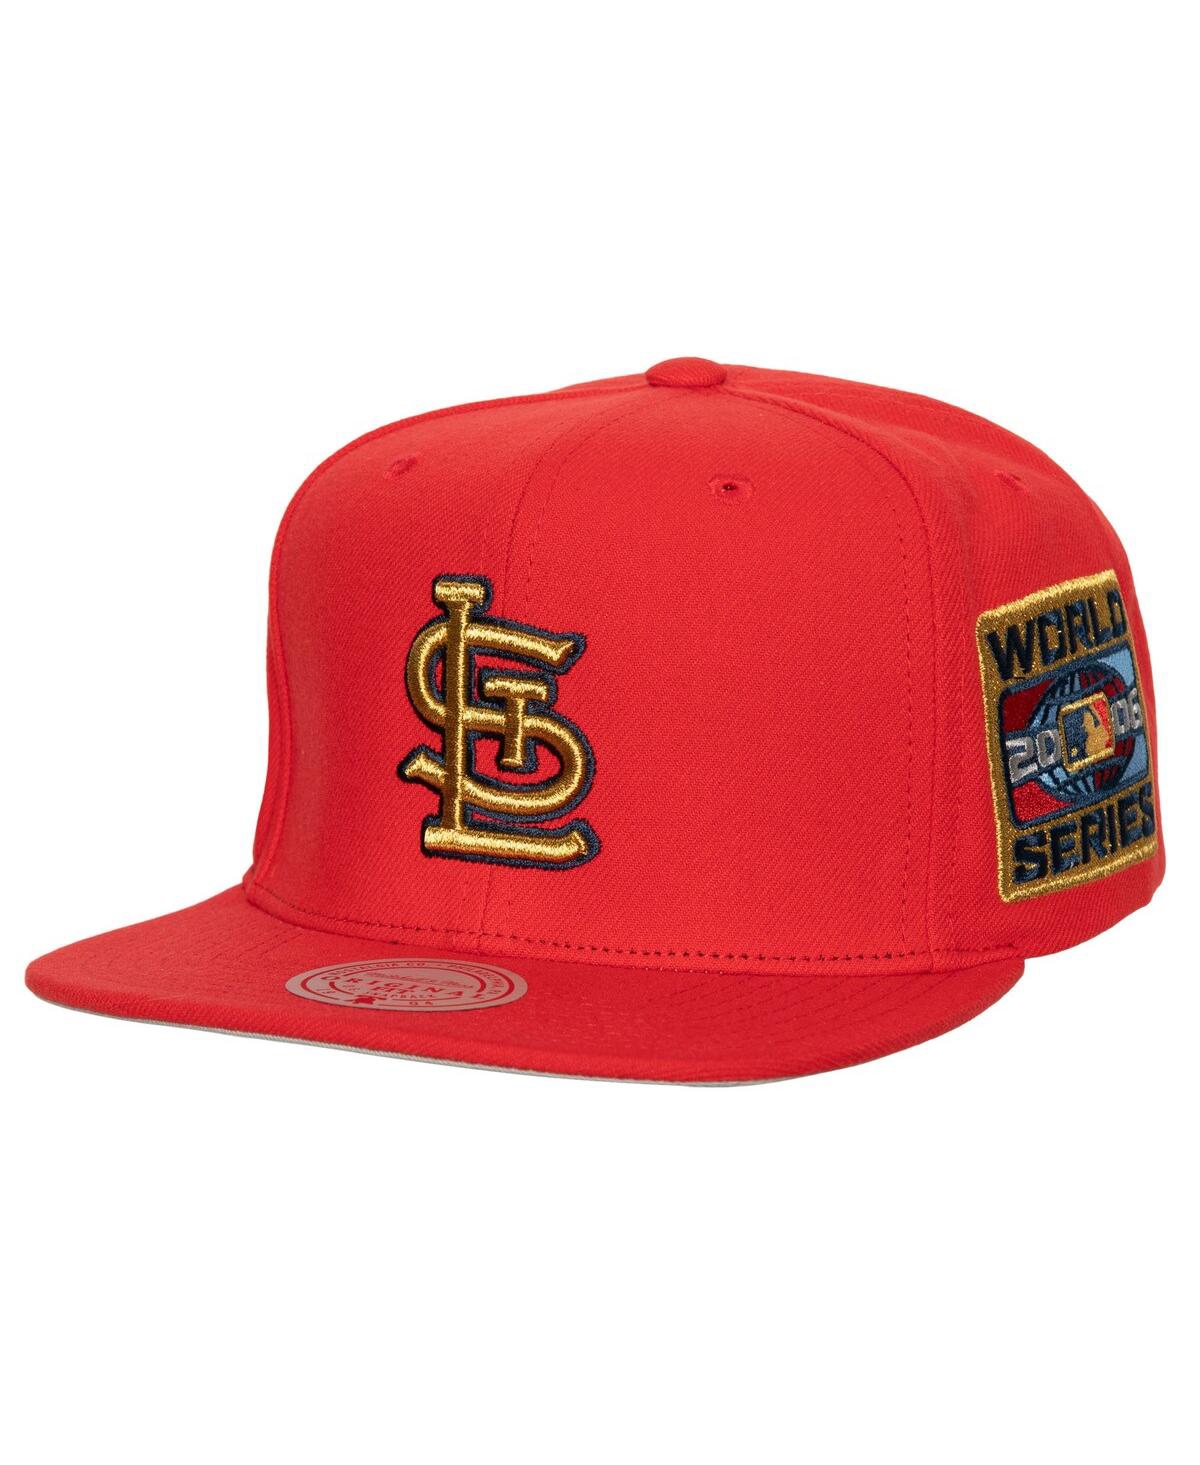 Mitchell & Ness Men's  Red St. Louis Cardinals Champ'd Up Snapback Hat